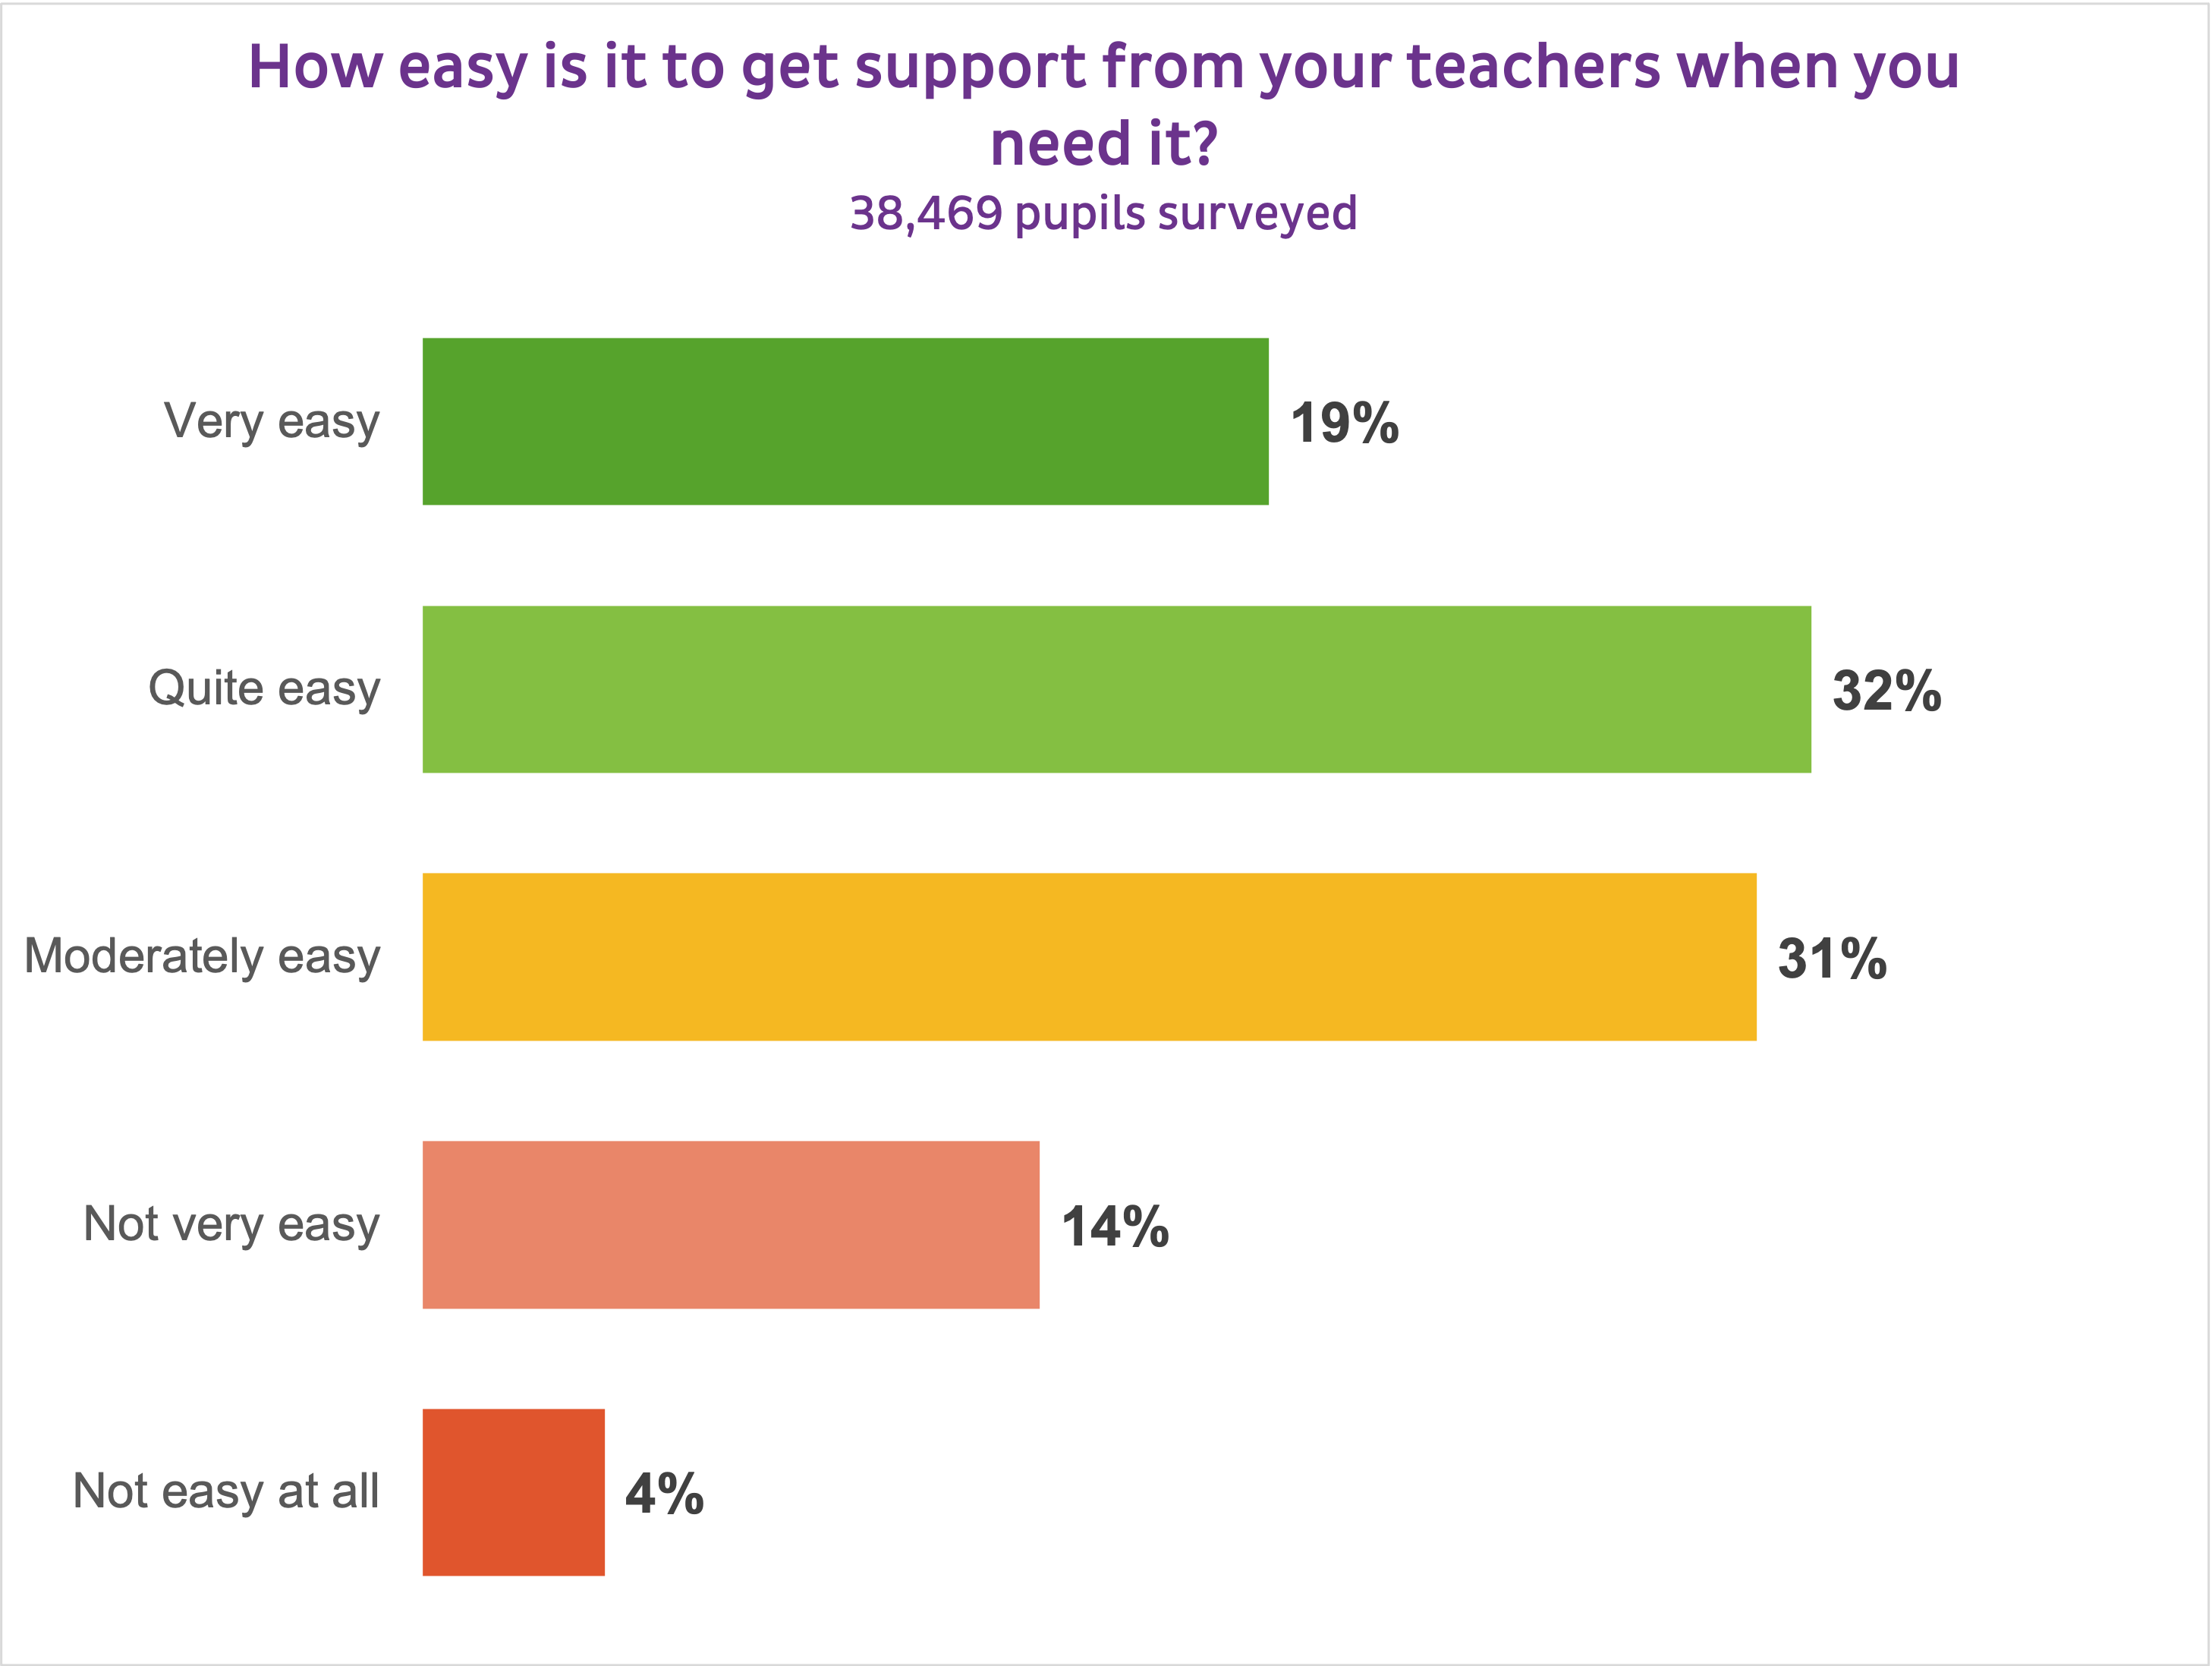 GRAPH
In this image, there is a graph which represents the data for, "How easy is it to get support from your teachers when you need it?" 
19% said very easy, 32% said quite easy, 31% said moderately easy, 14% said not very easy and 4% said not easy at all. 